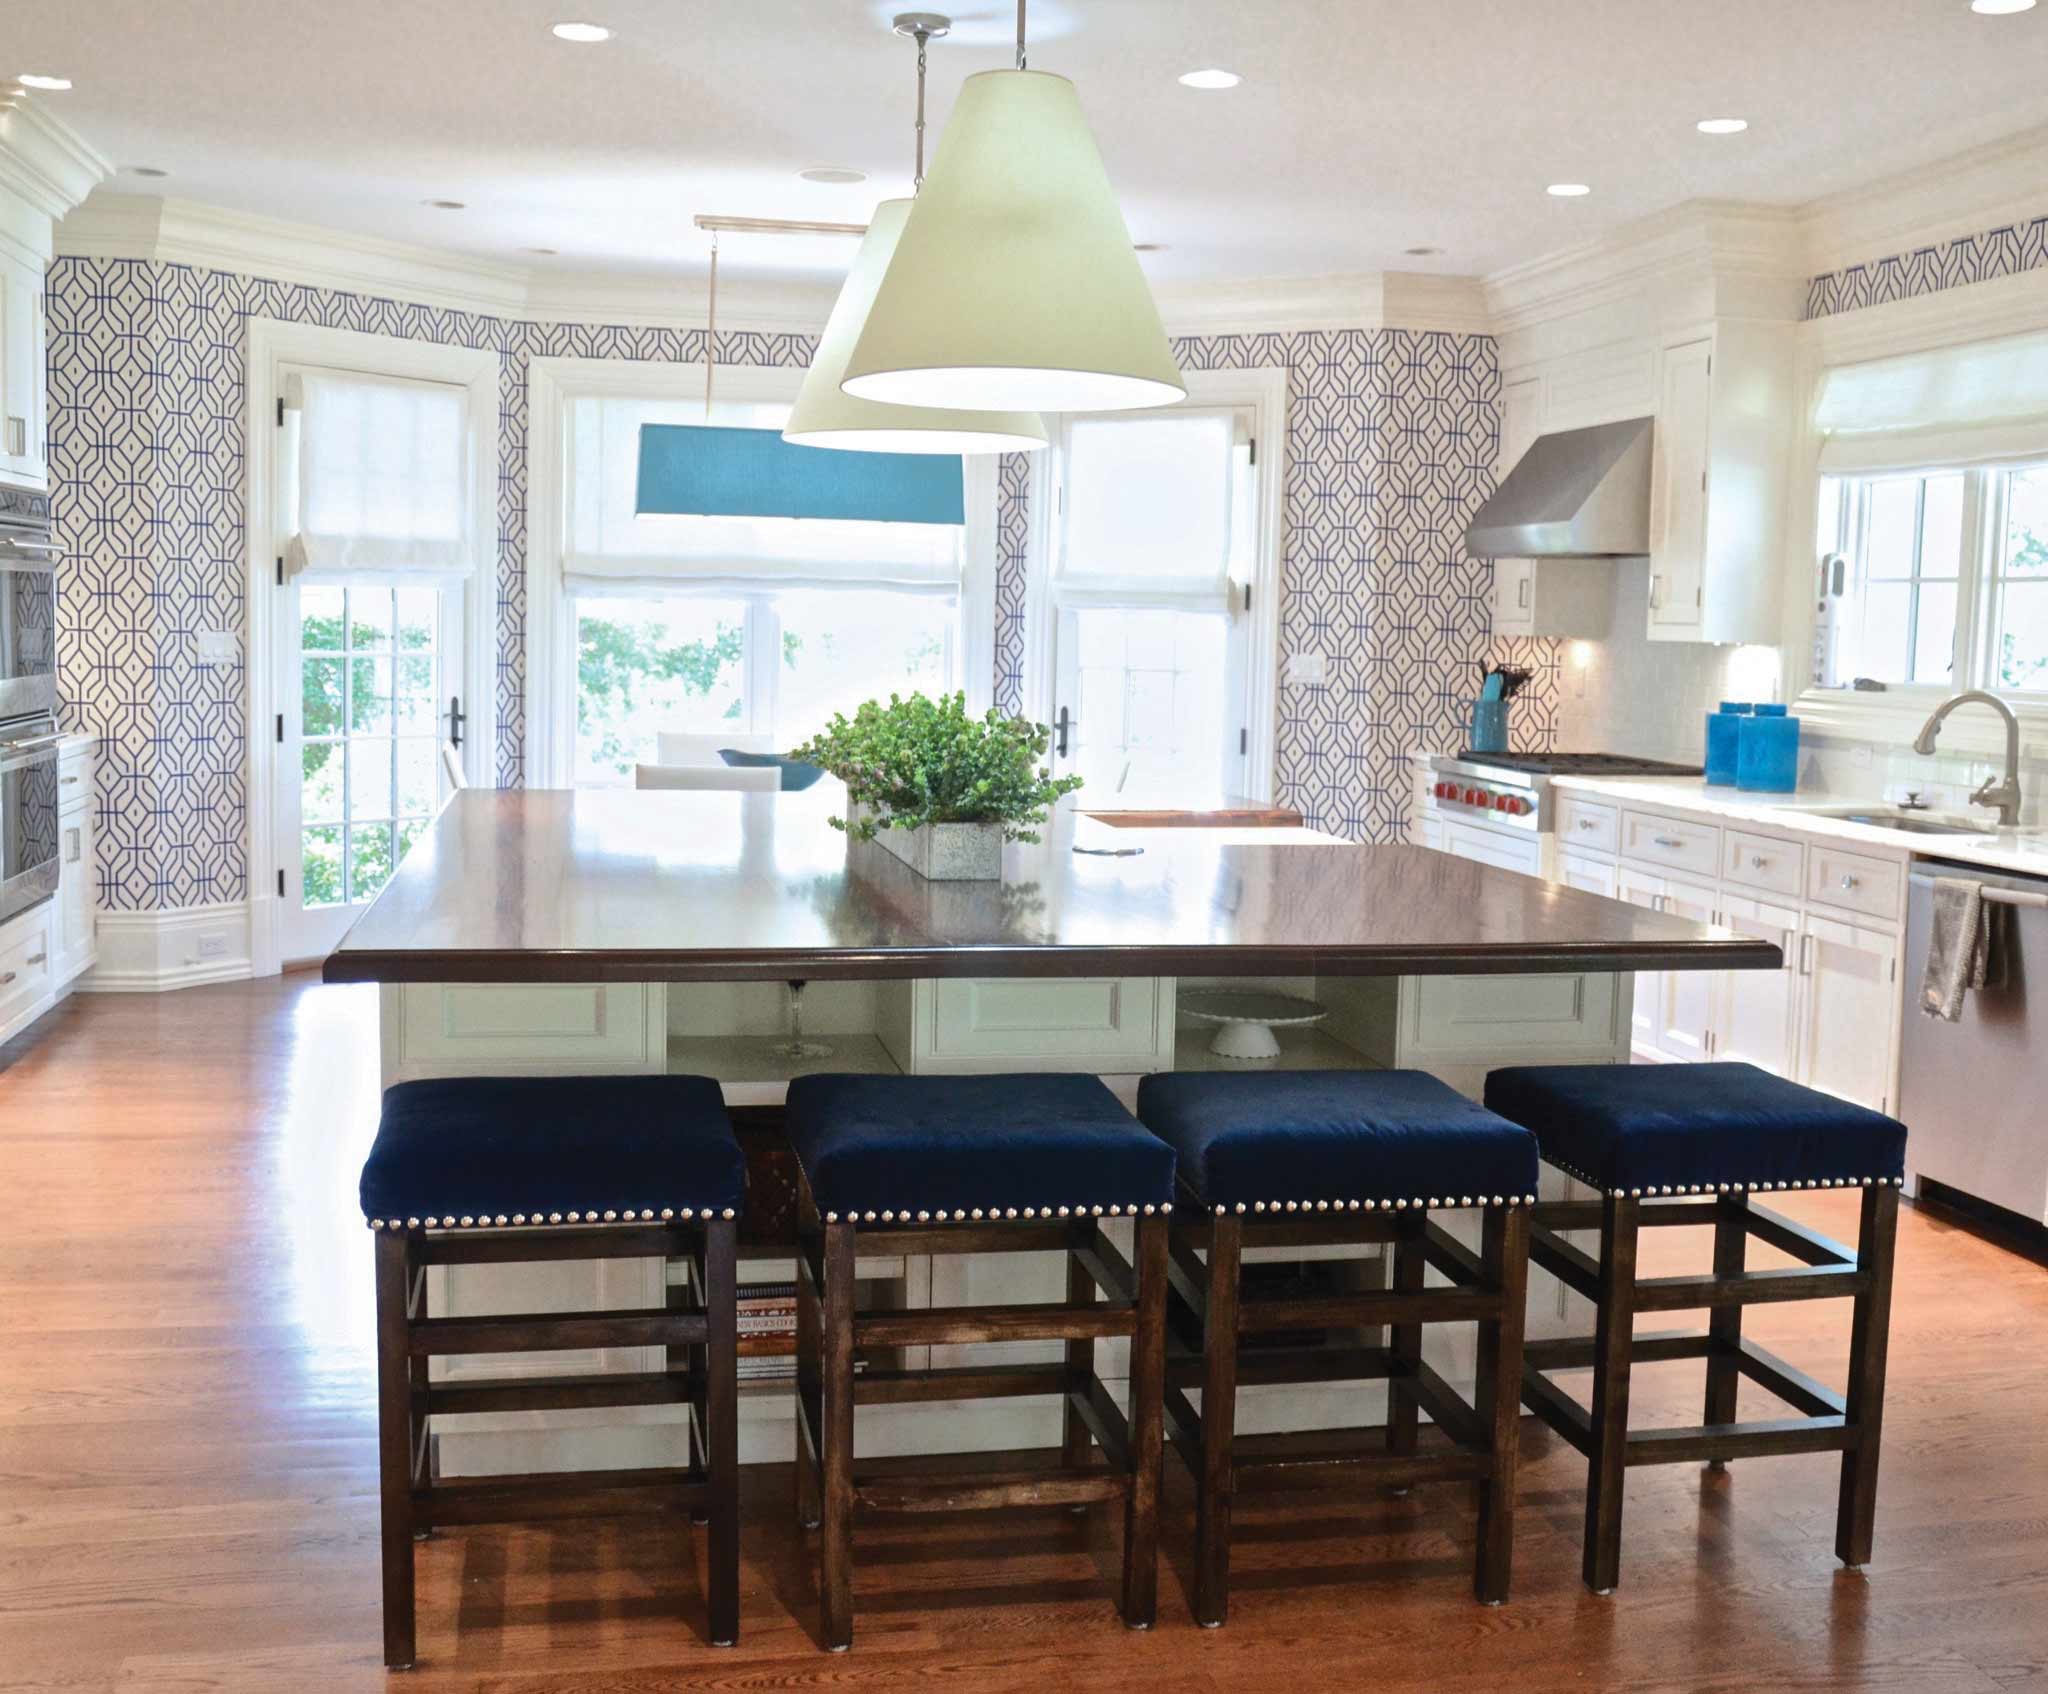 A kitchen designed by D2 Interiors with blue and white wallpaper and blue stools as a focal point.